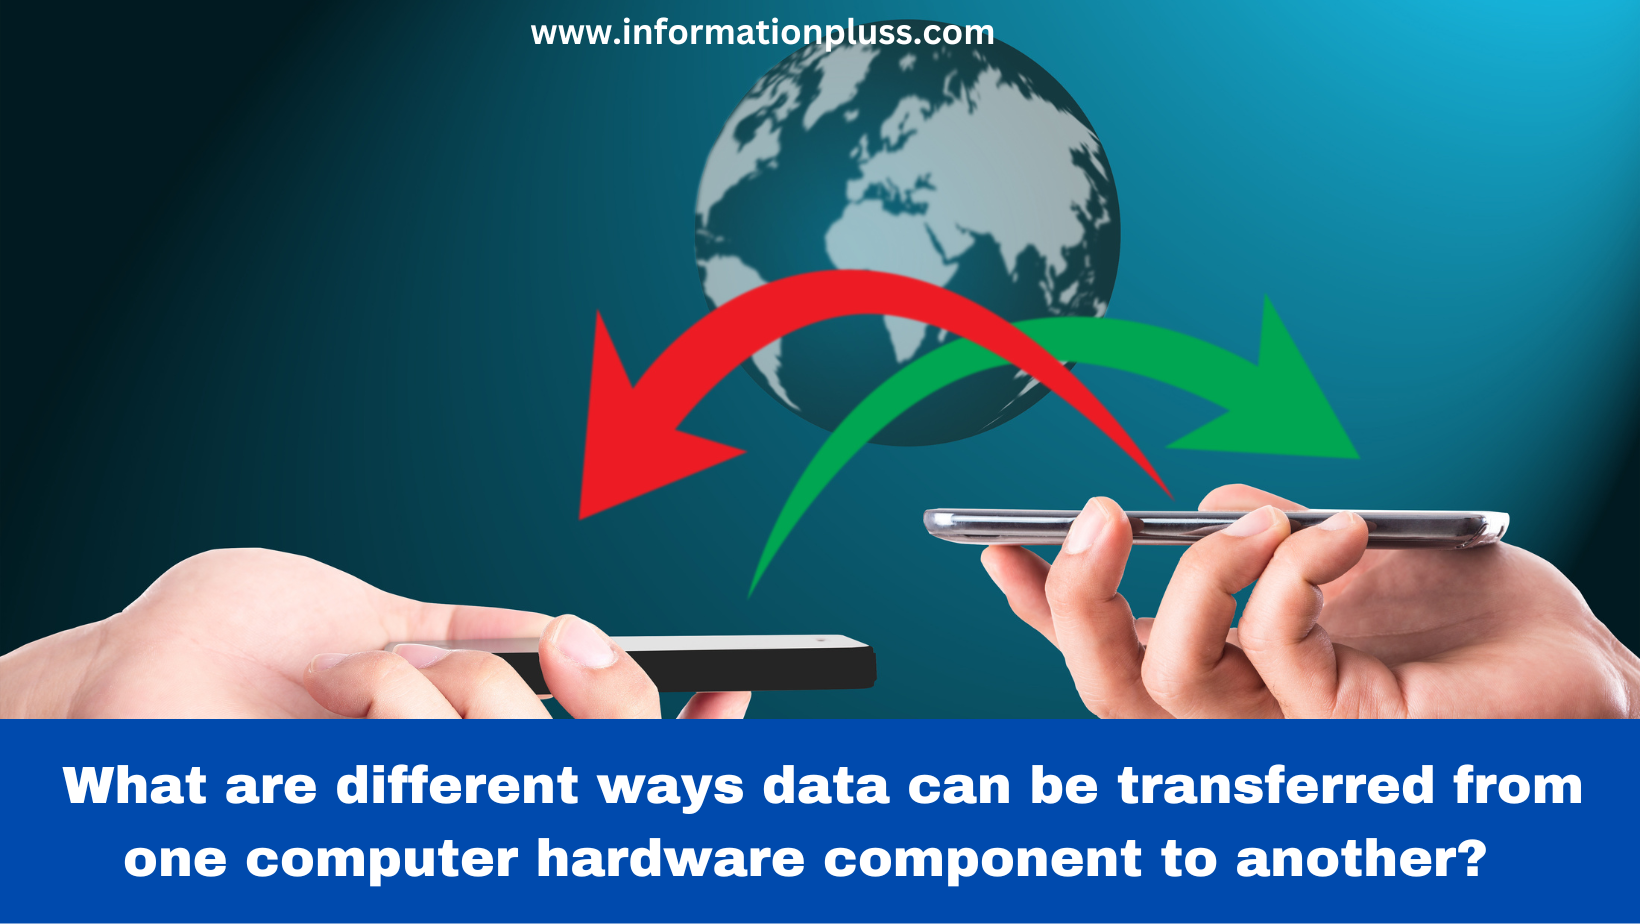 What are different ways data can be transferred from one computer hardware component to another?